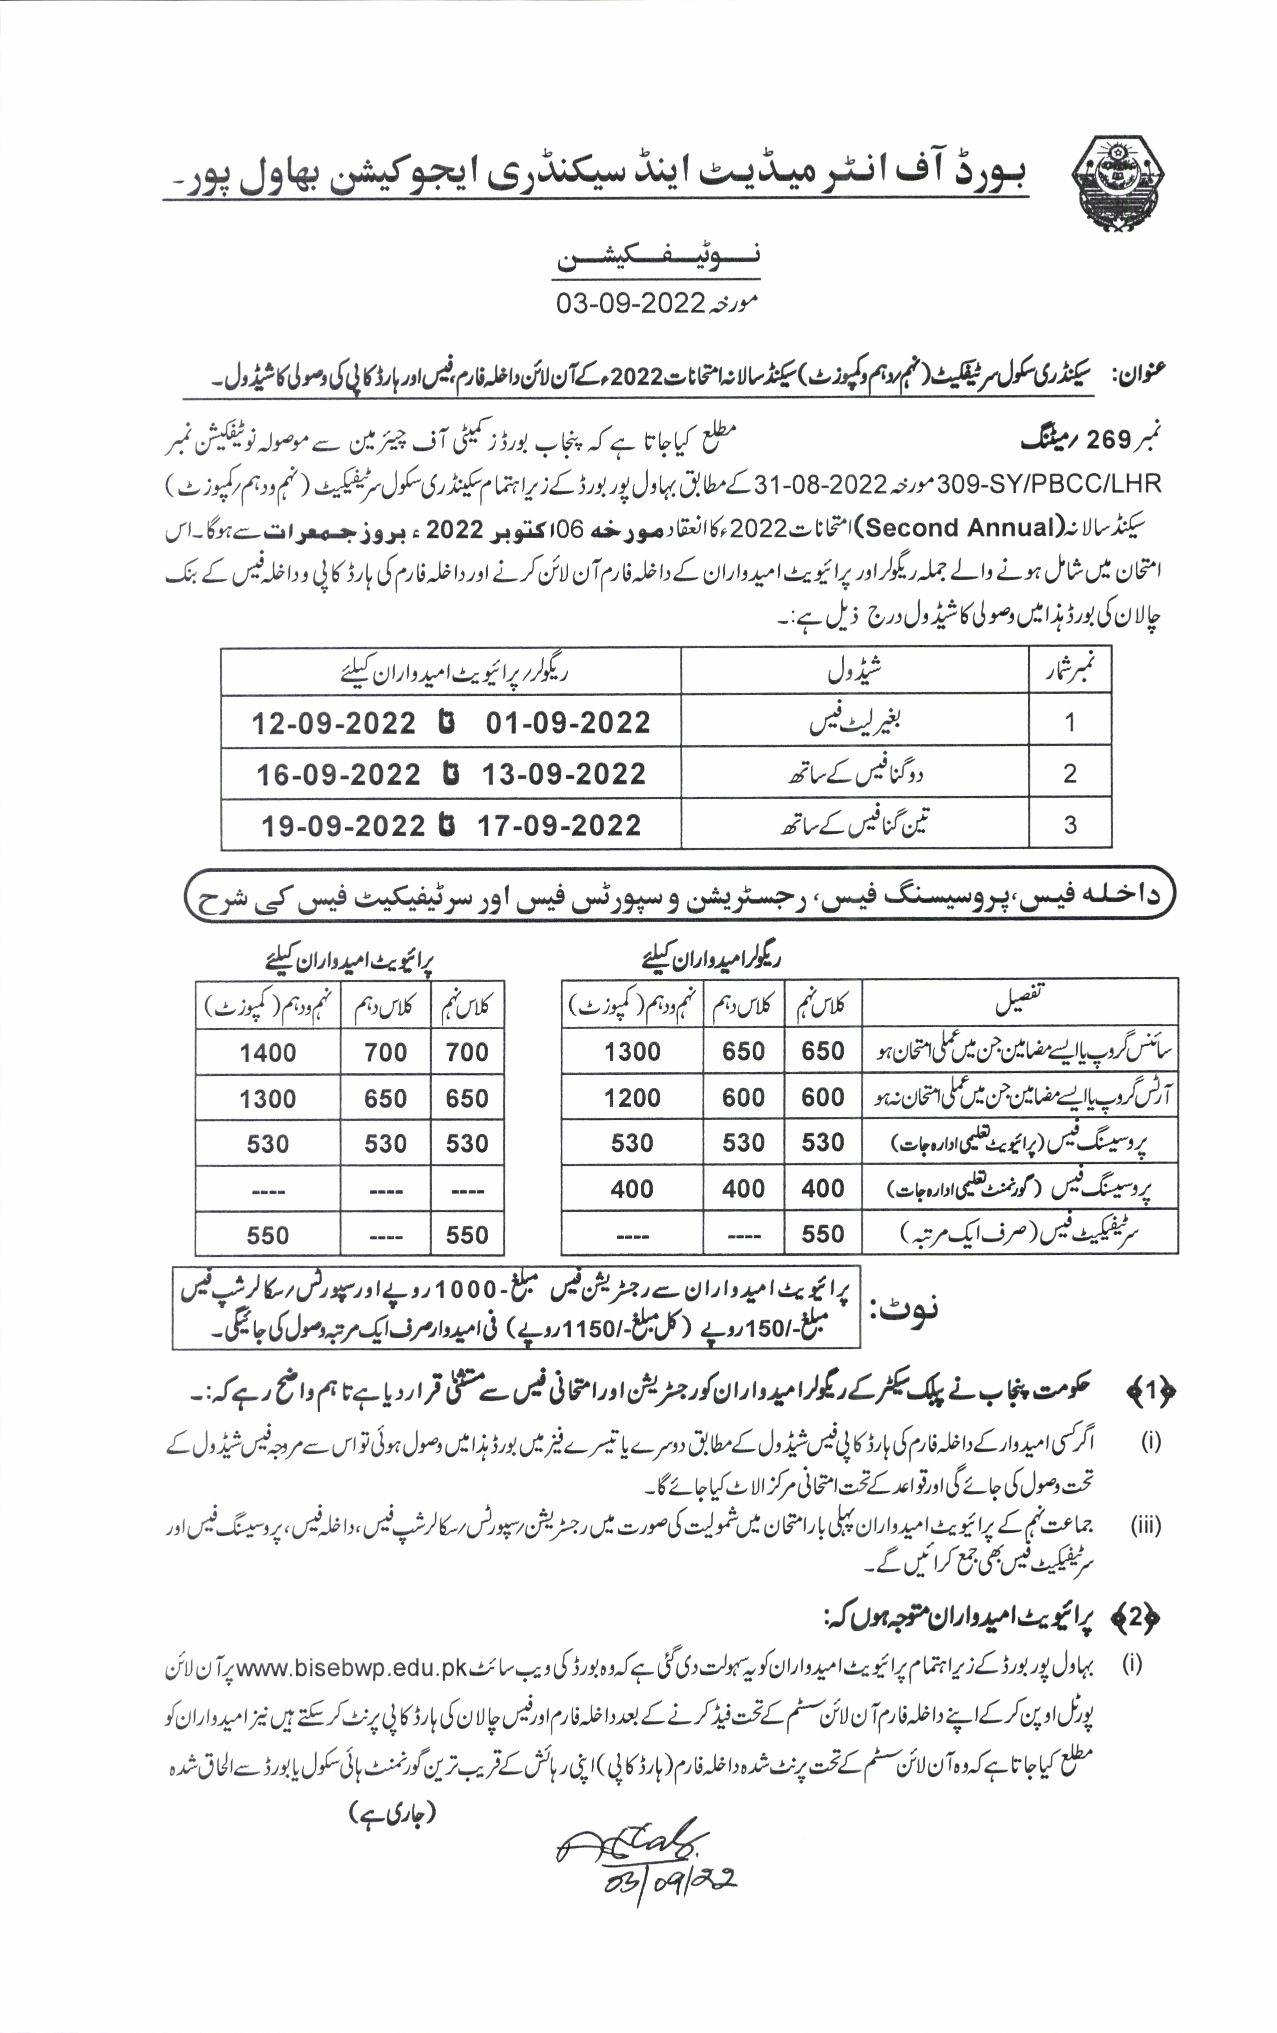 2nd Annual Examination 2022, Schedule Released By BISE, Bahawalpur